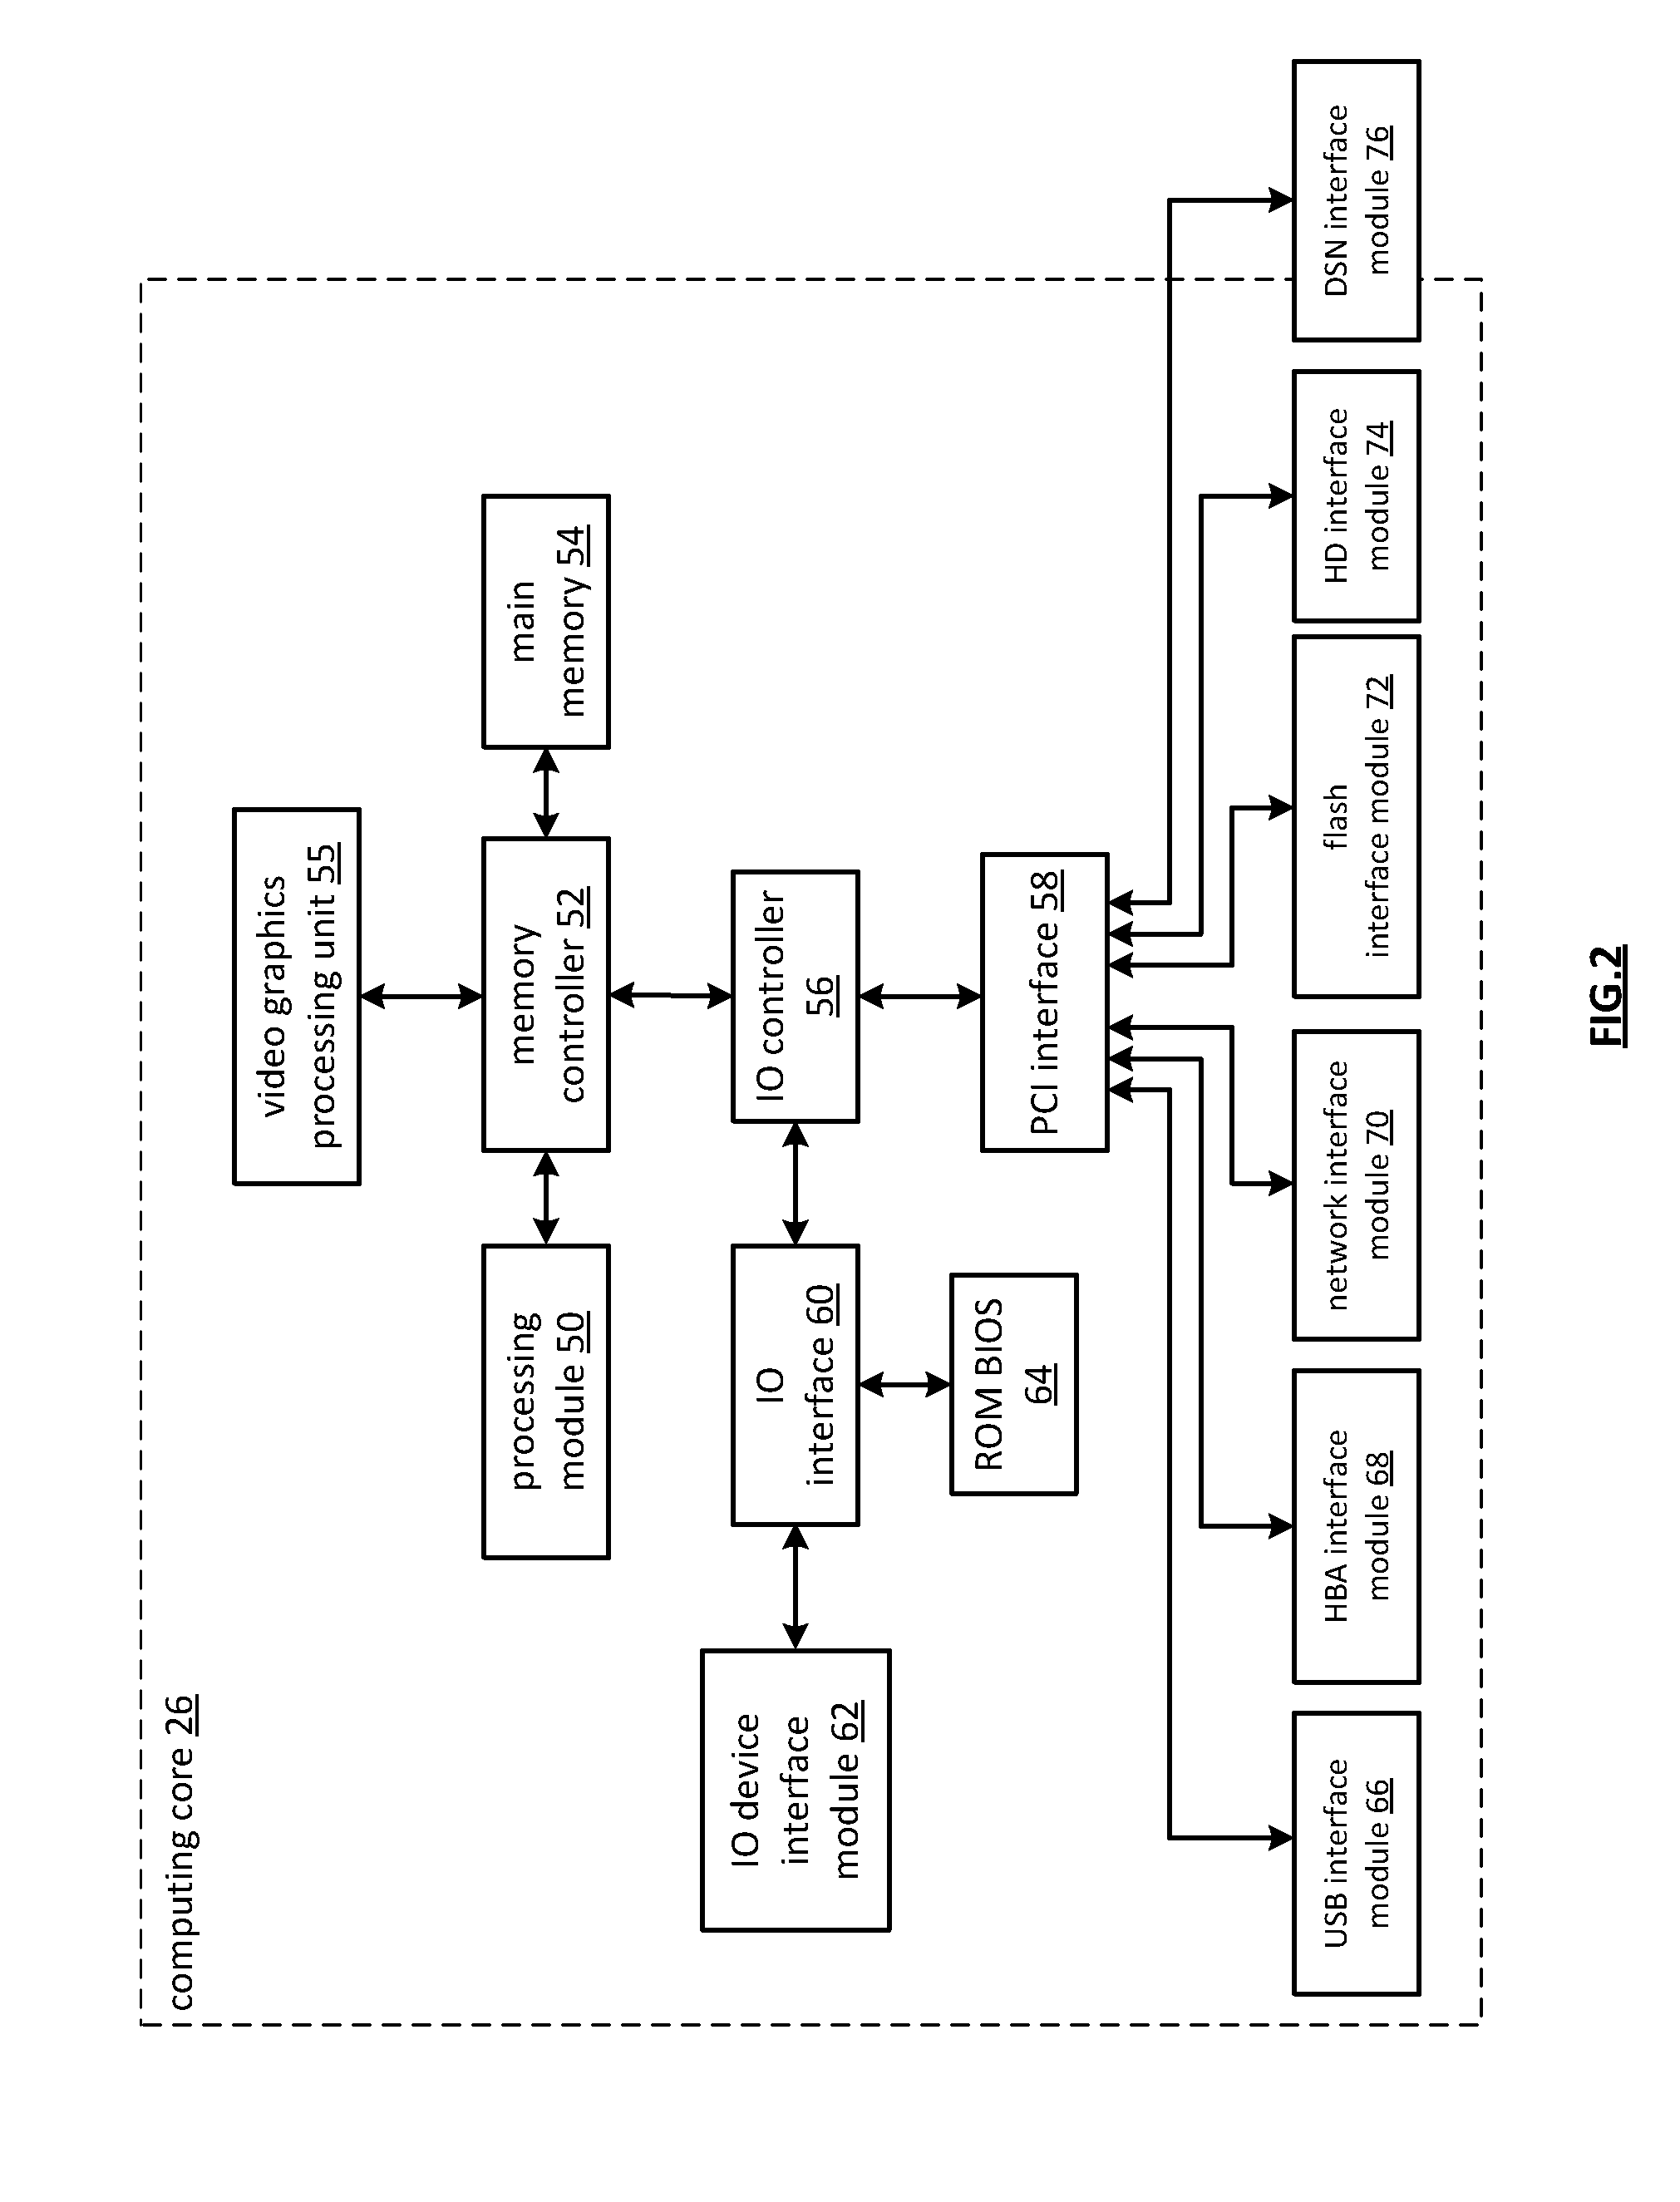 Method and apparatus for slice partial rebuilding in a dispersed storage network